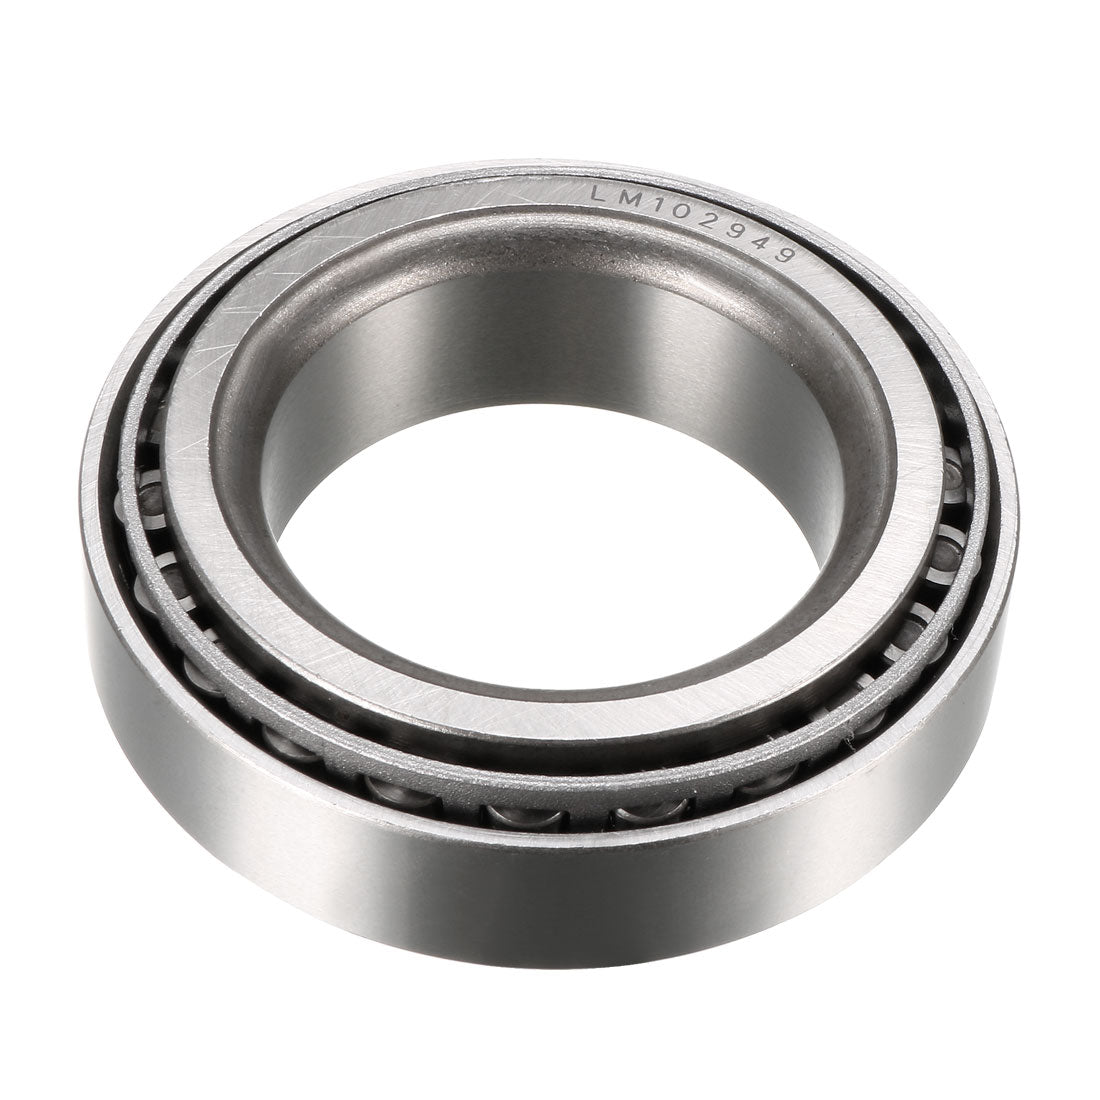 Uxcell Uxcell LM12748/LM12710 Tapered Roller Bearing Cone and Cup Set 0.84" Bore 1.78" OD 2pcs